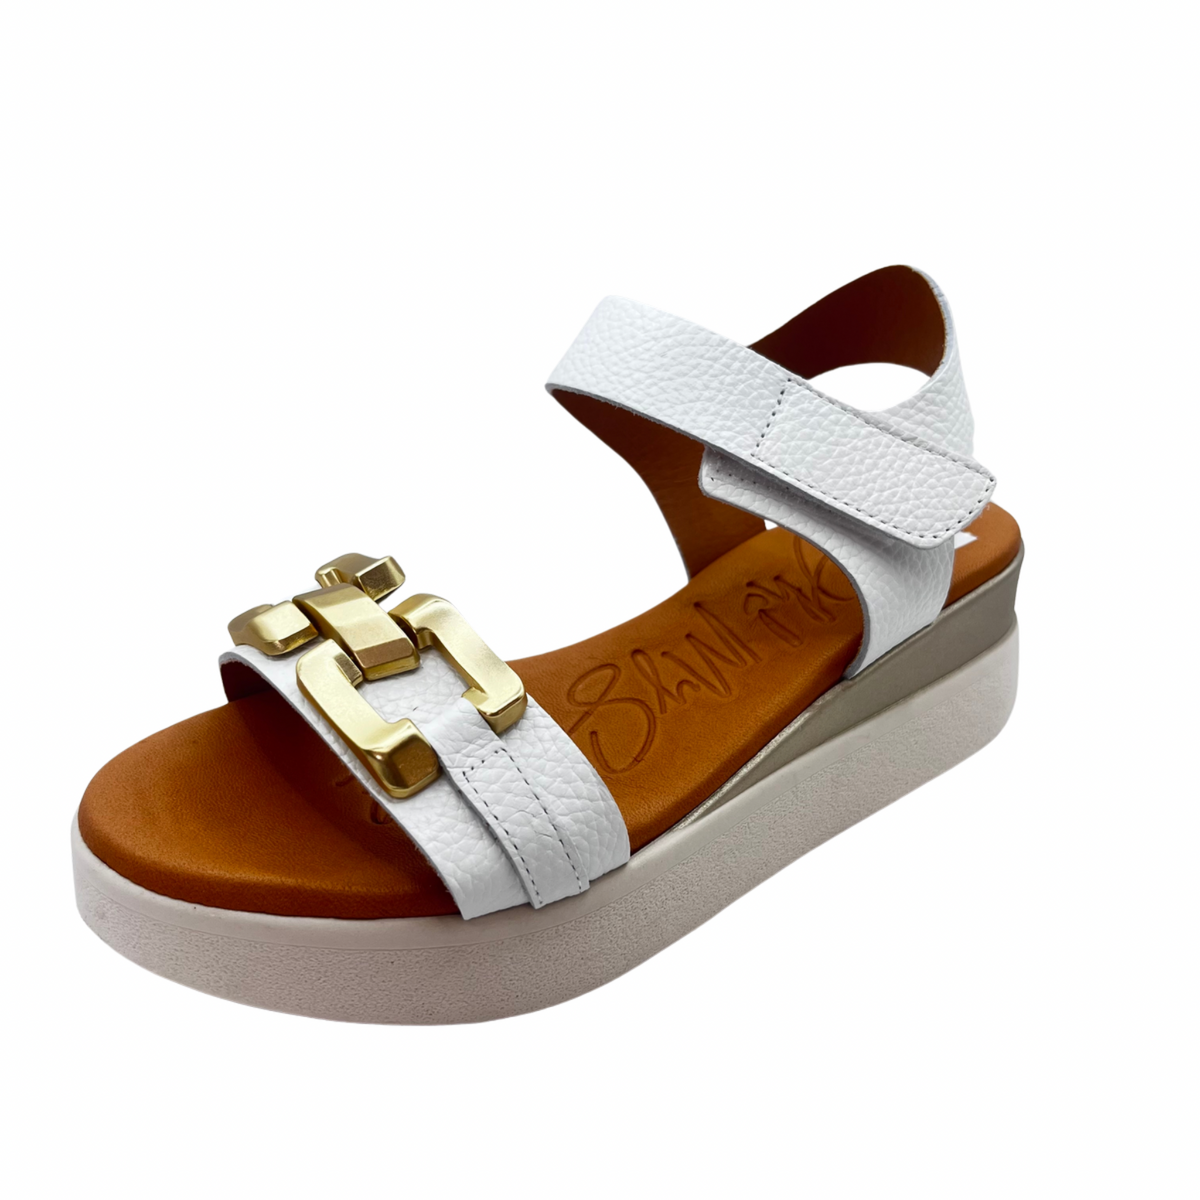 Oh My Sandals White Wedge Leather Sandal